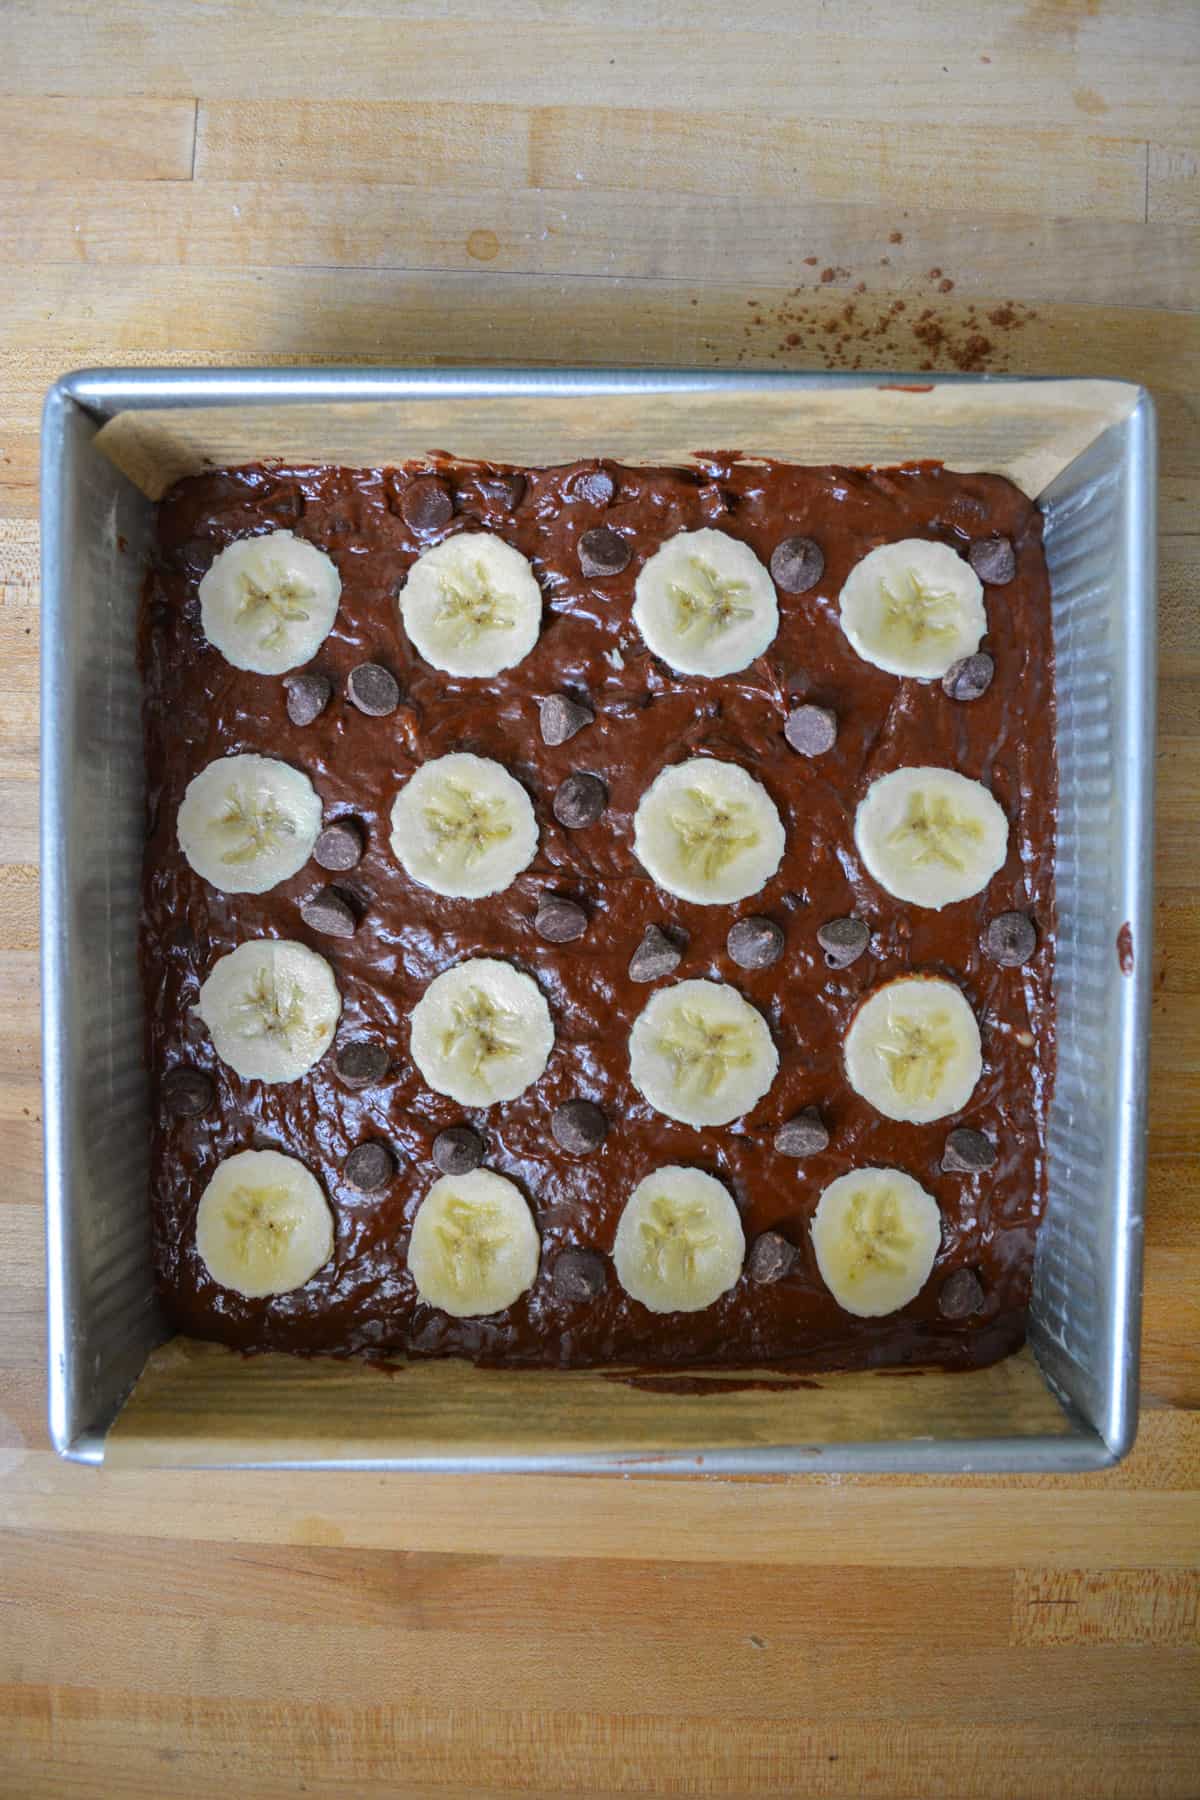 Brownie batter in a parchment-lined baking pan, topped with banana slices and chocolate chips.